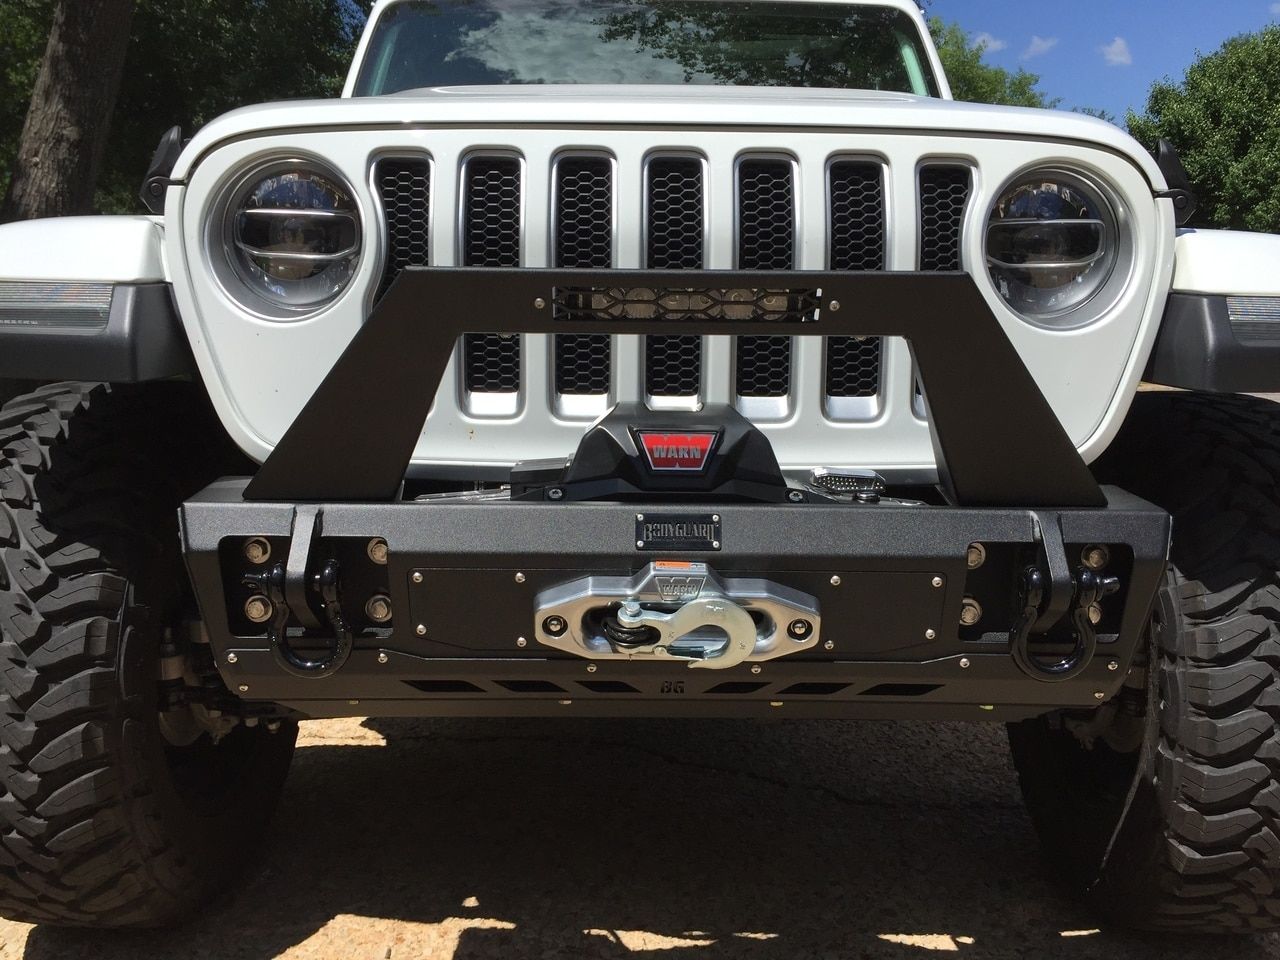 Bodyguard Bumpers Stubby Front Bumper for Jeep JL - Mod My Wrangler